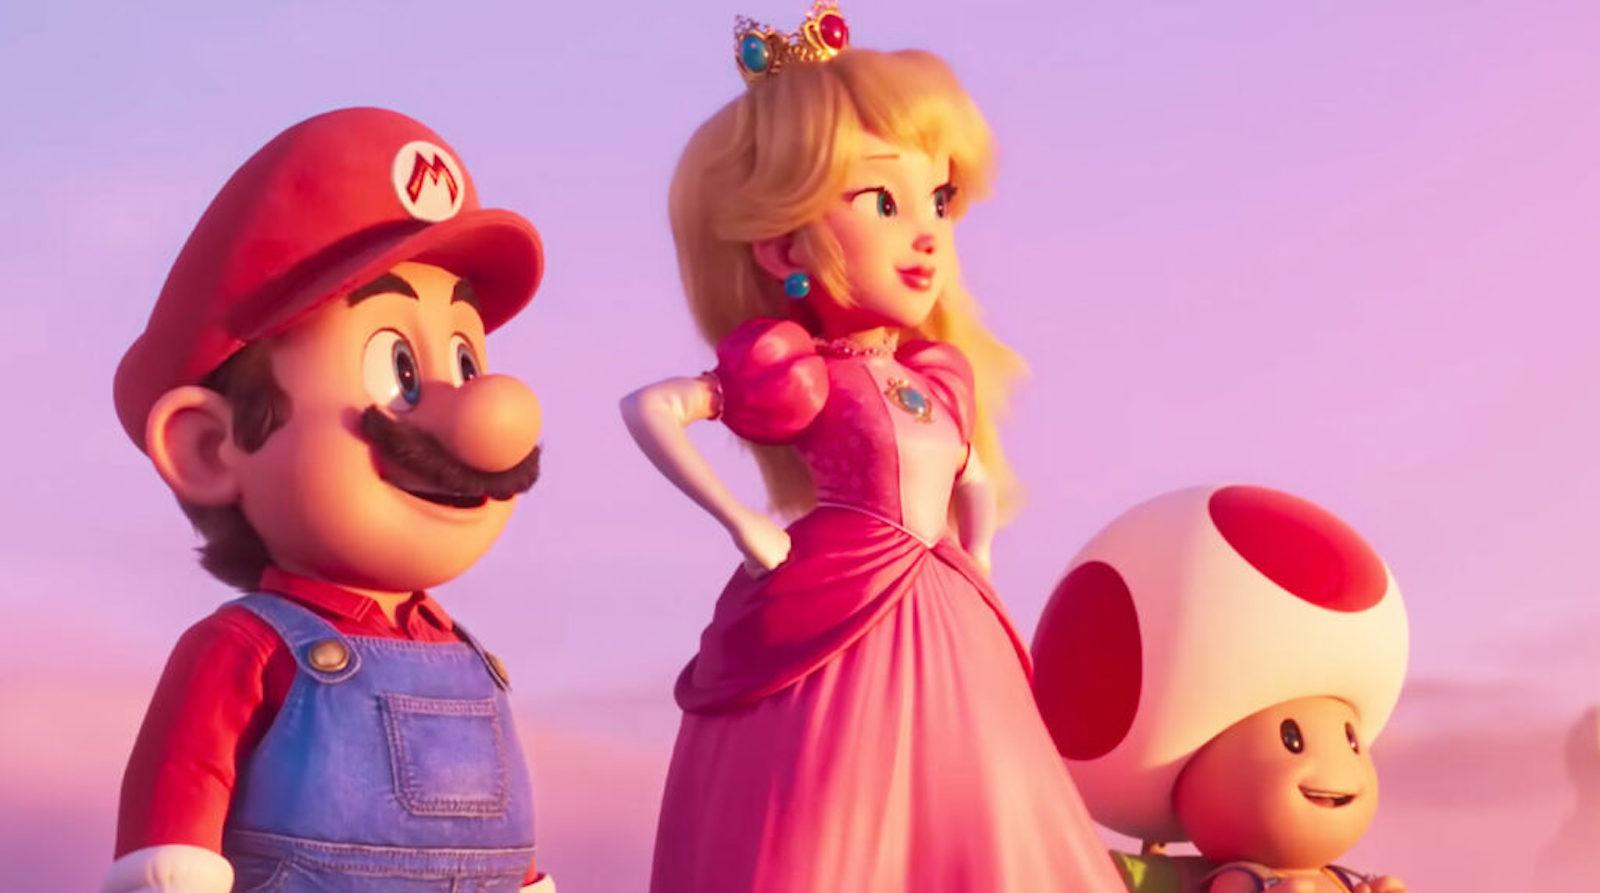 Someone actually completed this insane Super Mario puzzle